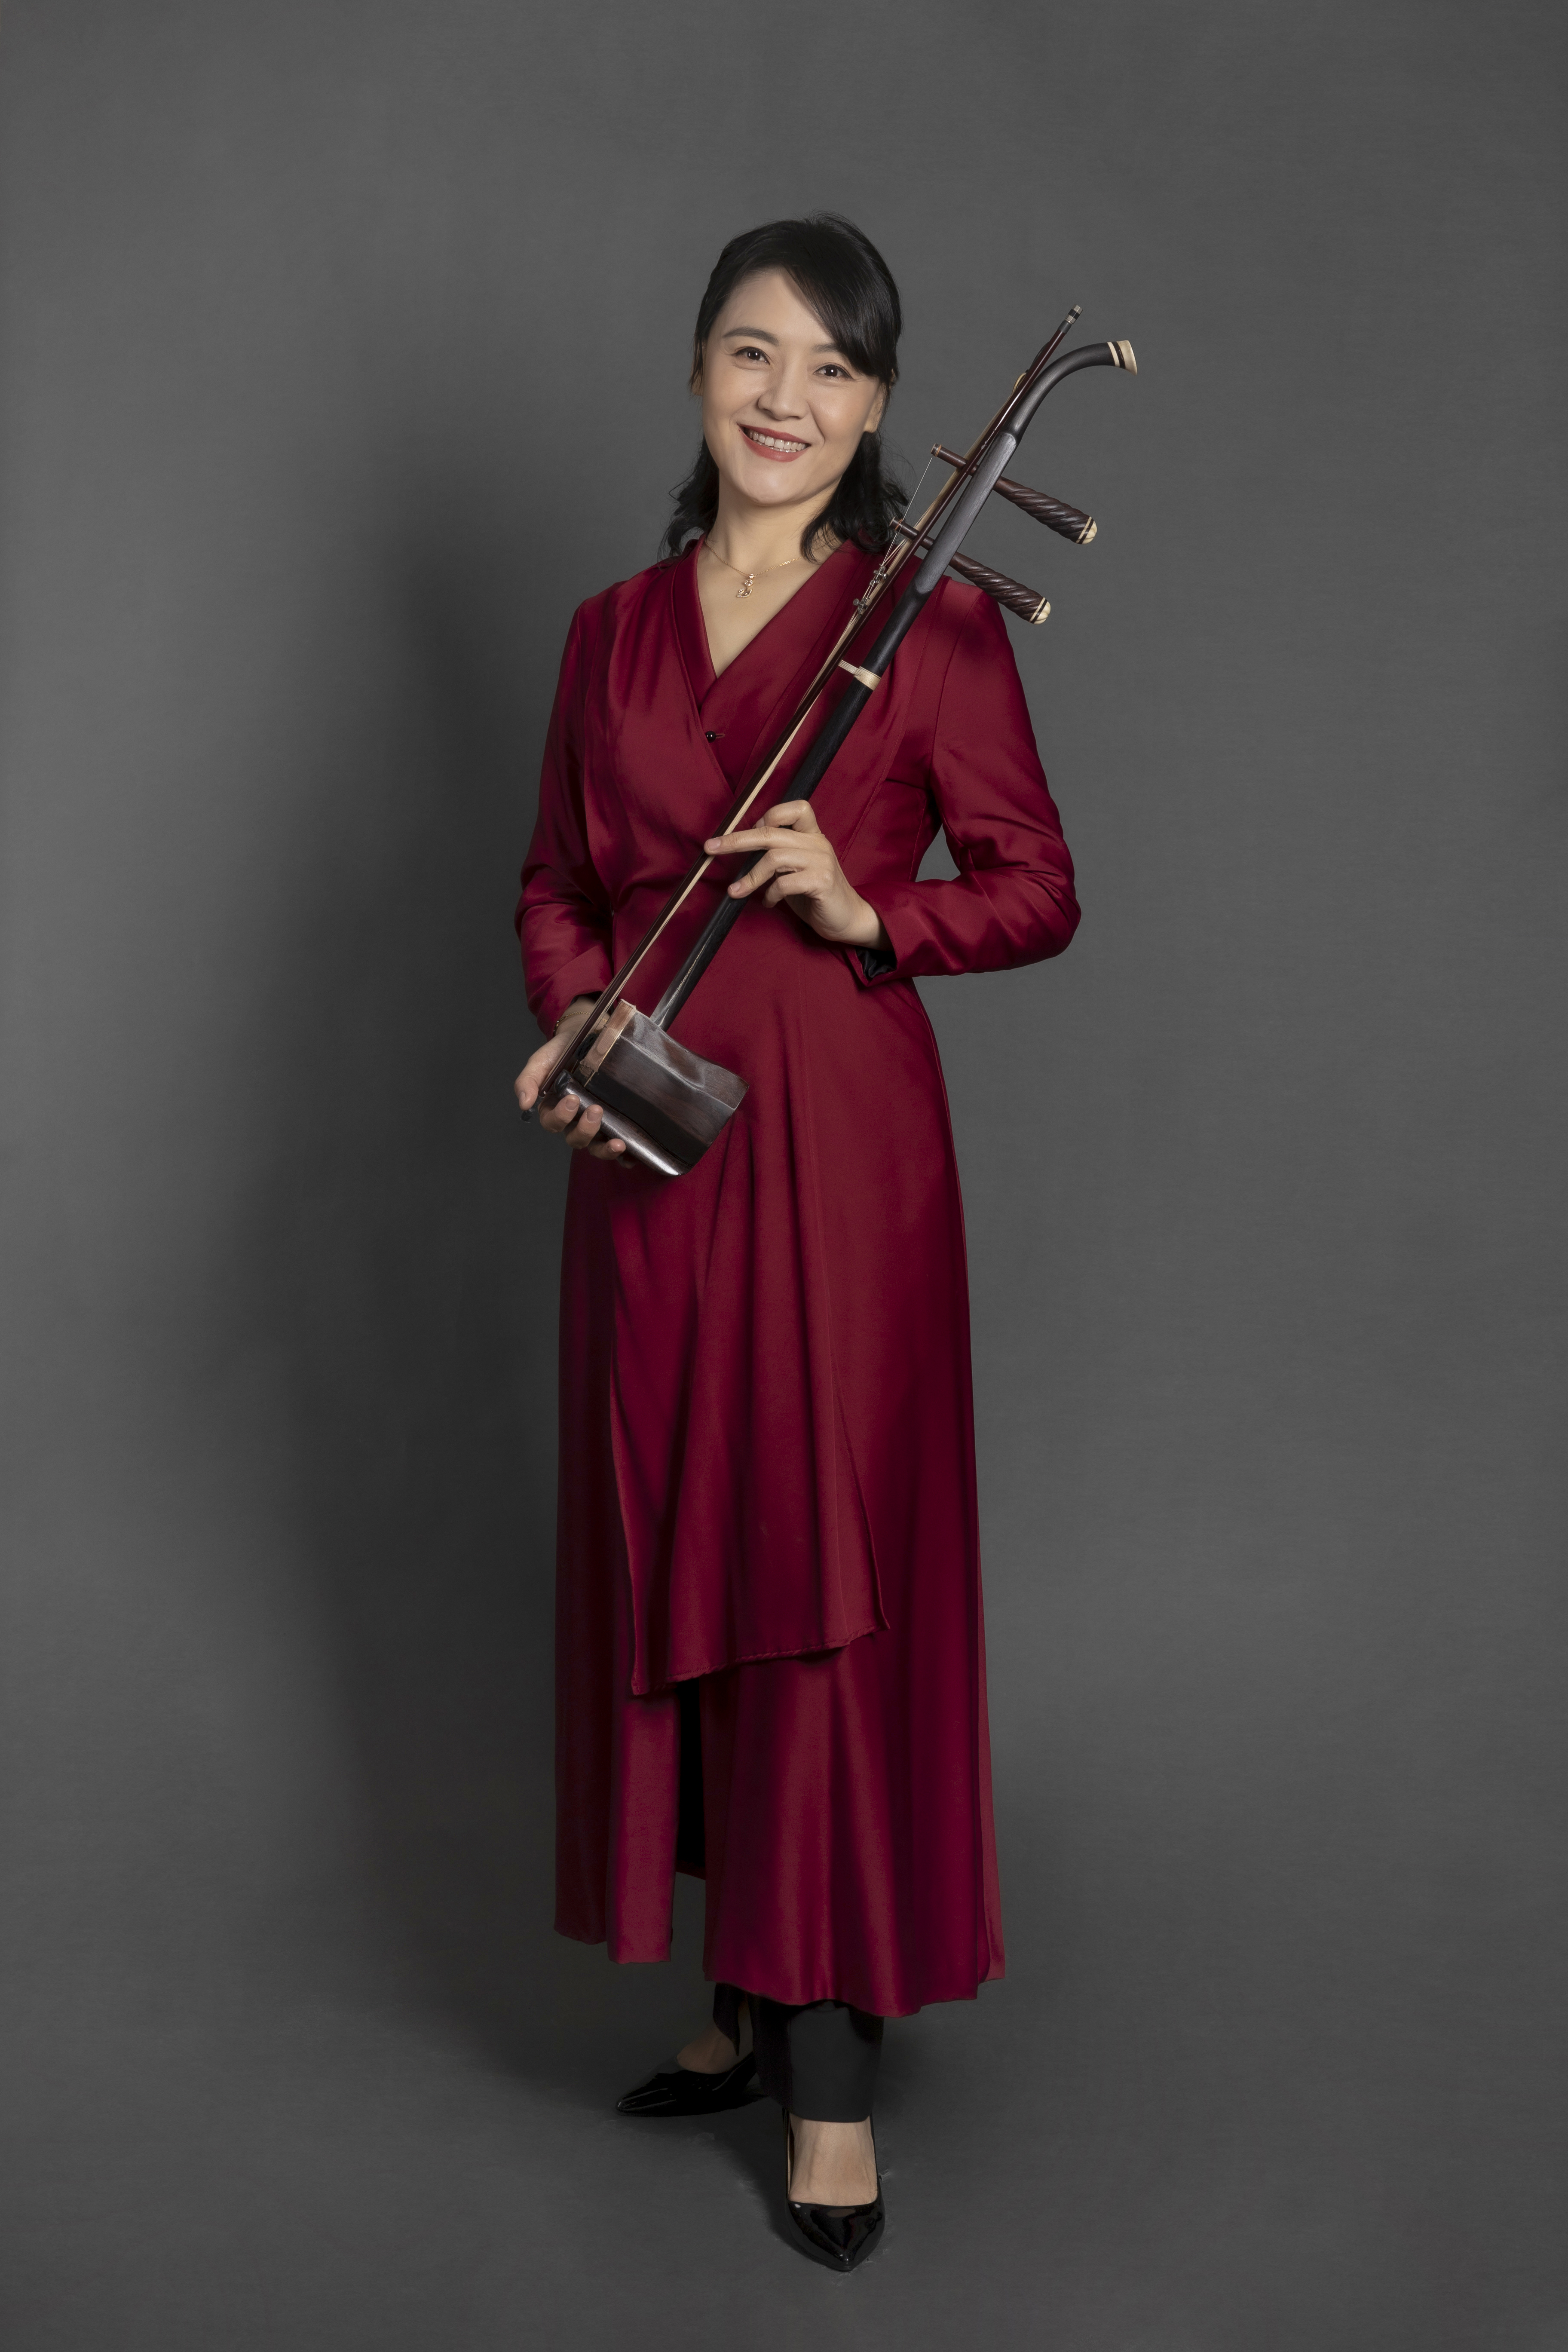 Xu_Wenjing Musicians of Singapore Chinese Orchestra